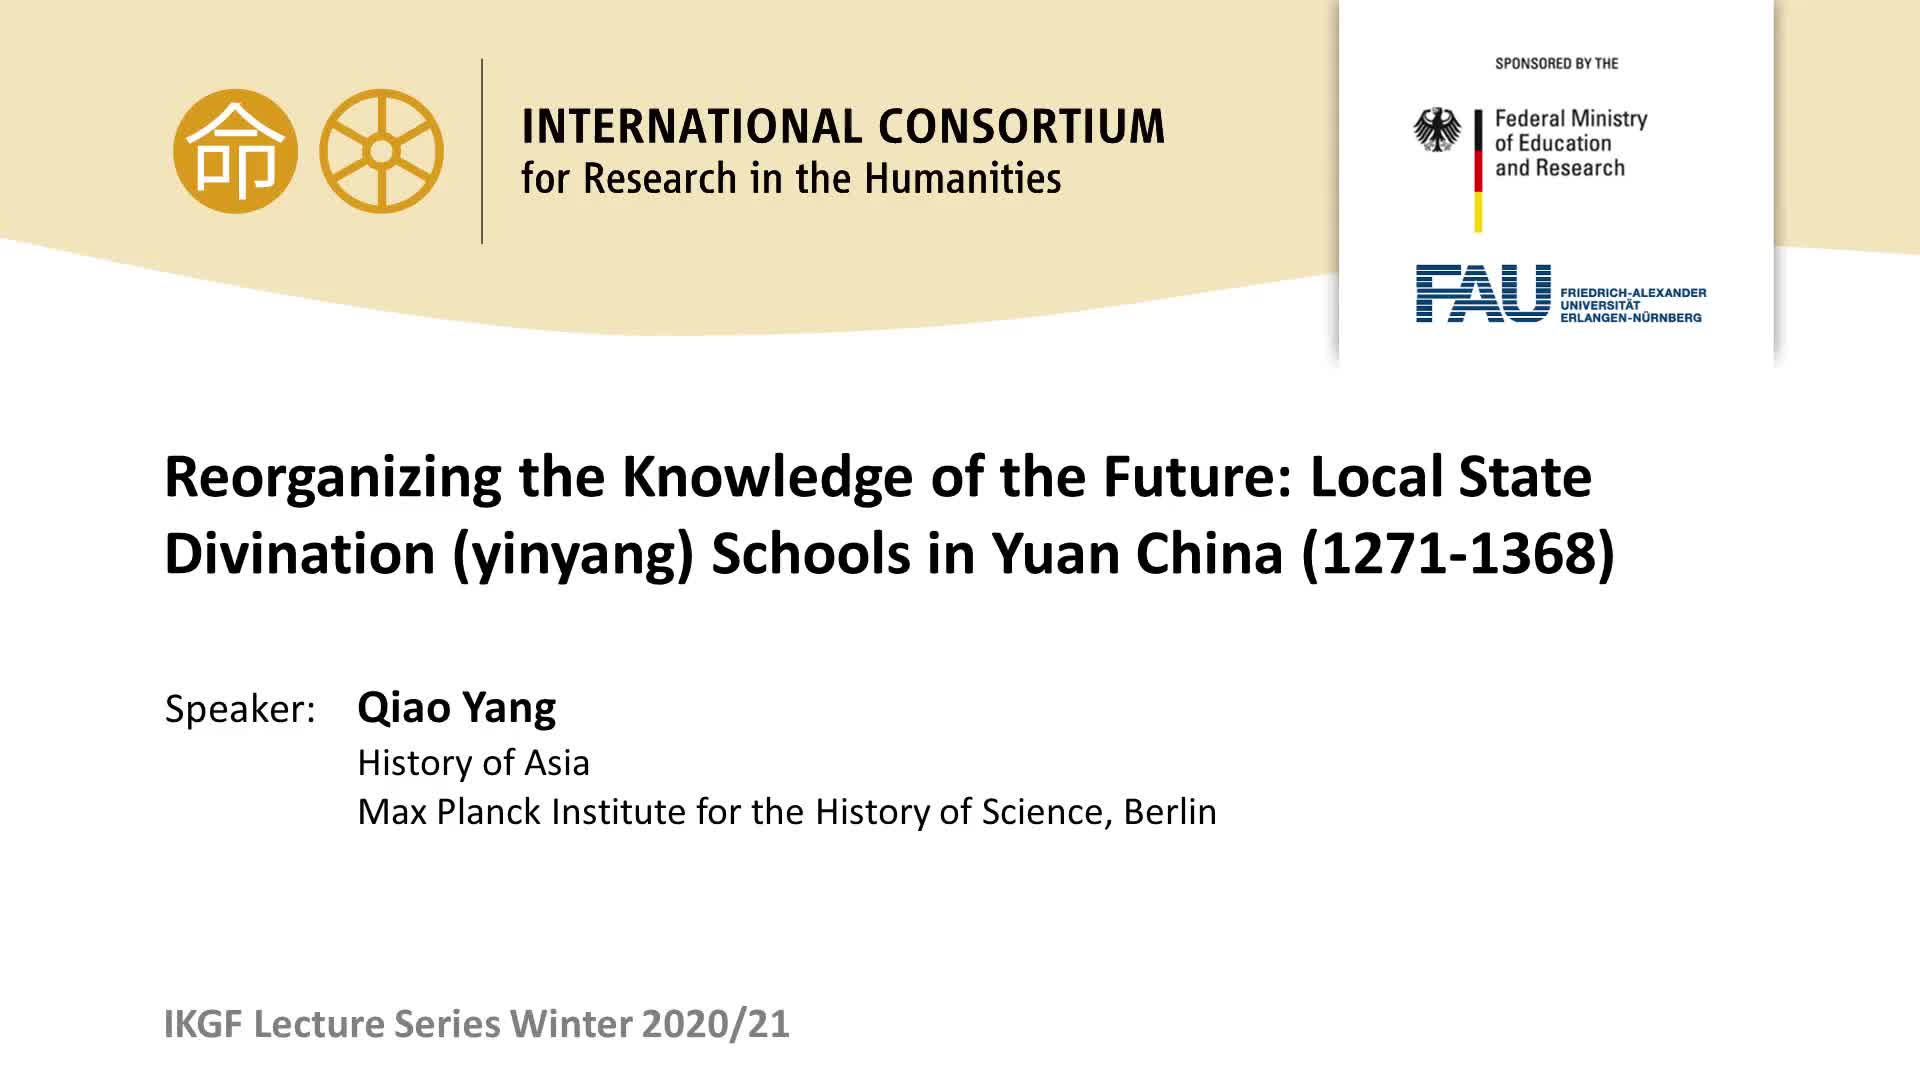 Reorganizing the Knowledge of the Future: Local State Divination (yinyang) Schools in Yuan China (1271-1368) preview image